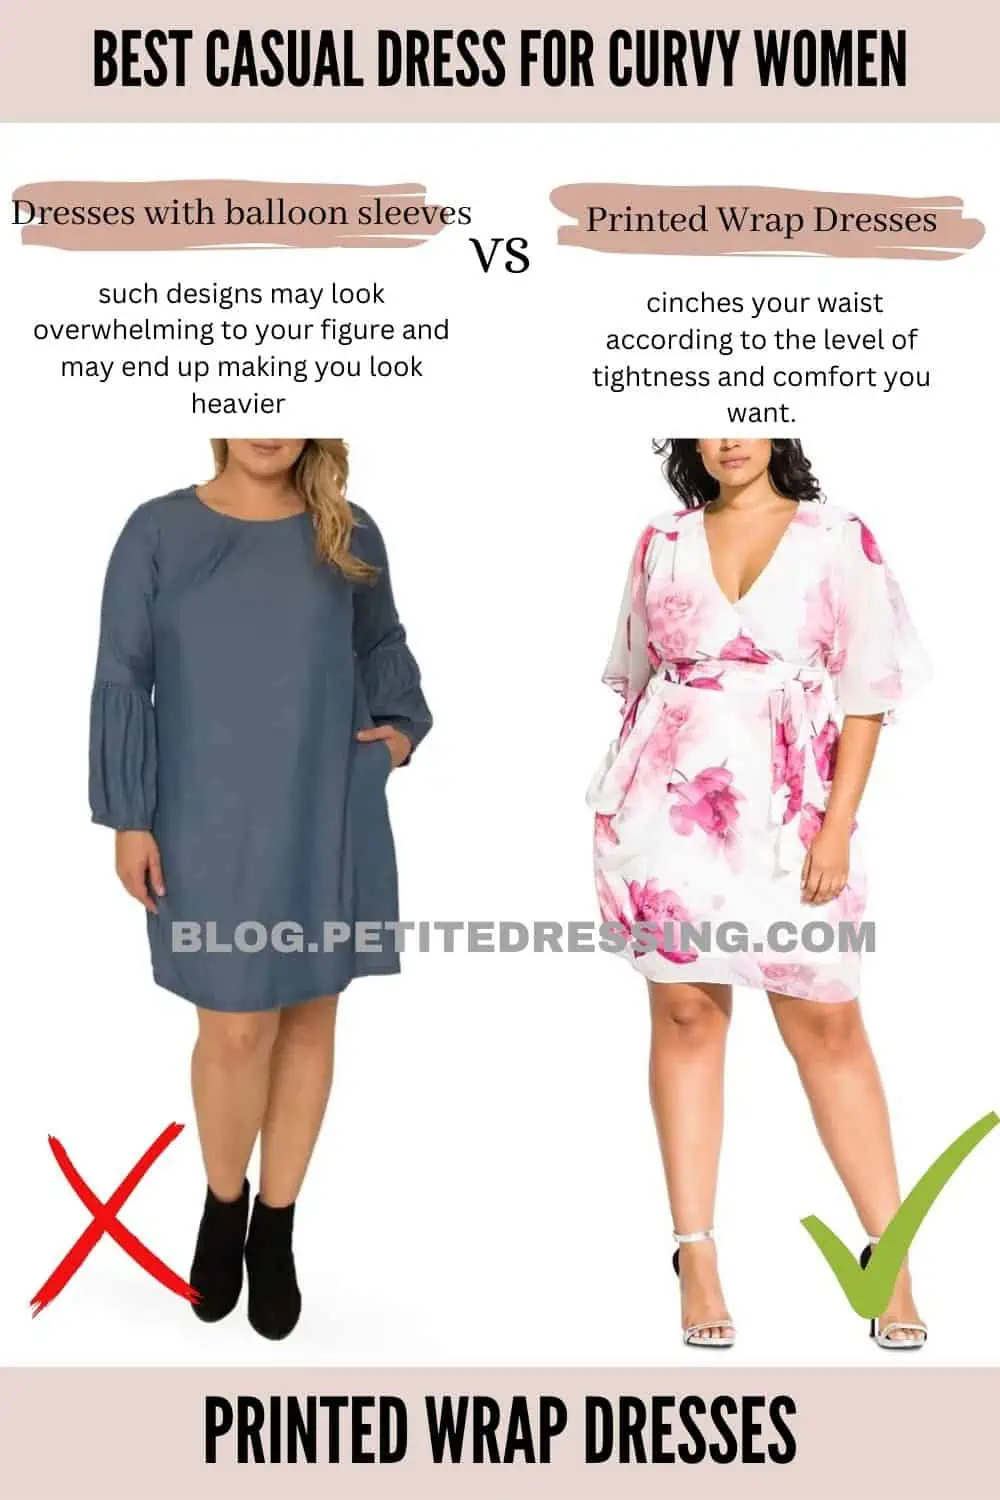 The Casual Dress Guide for Curvy Women - Petite Dressing